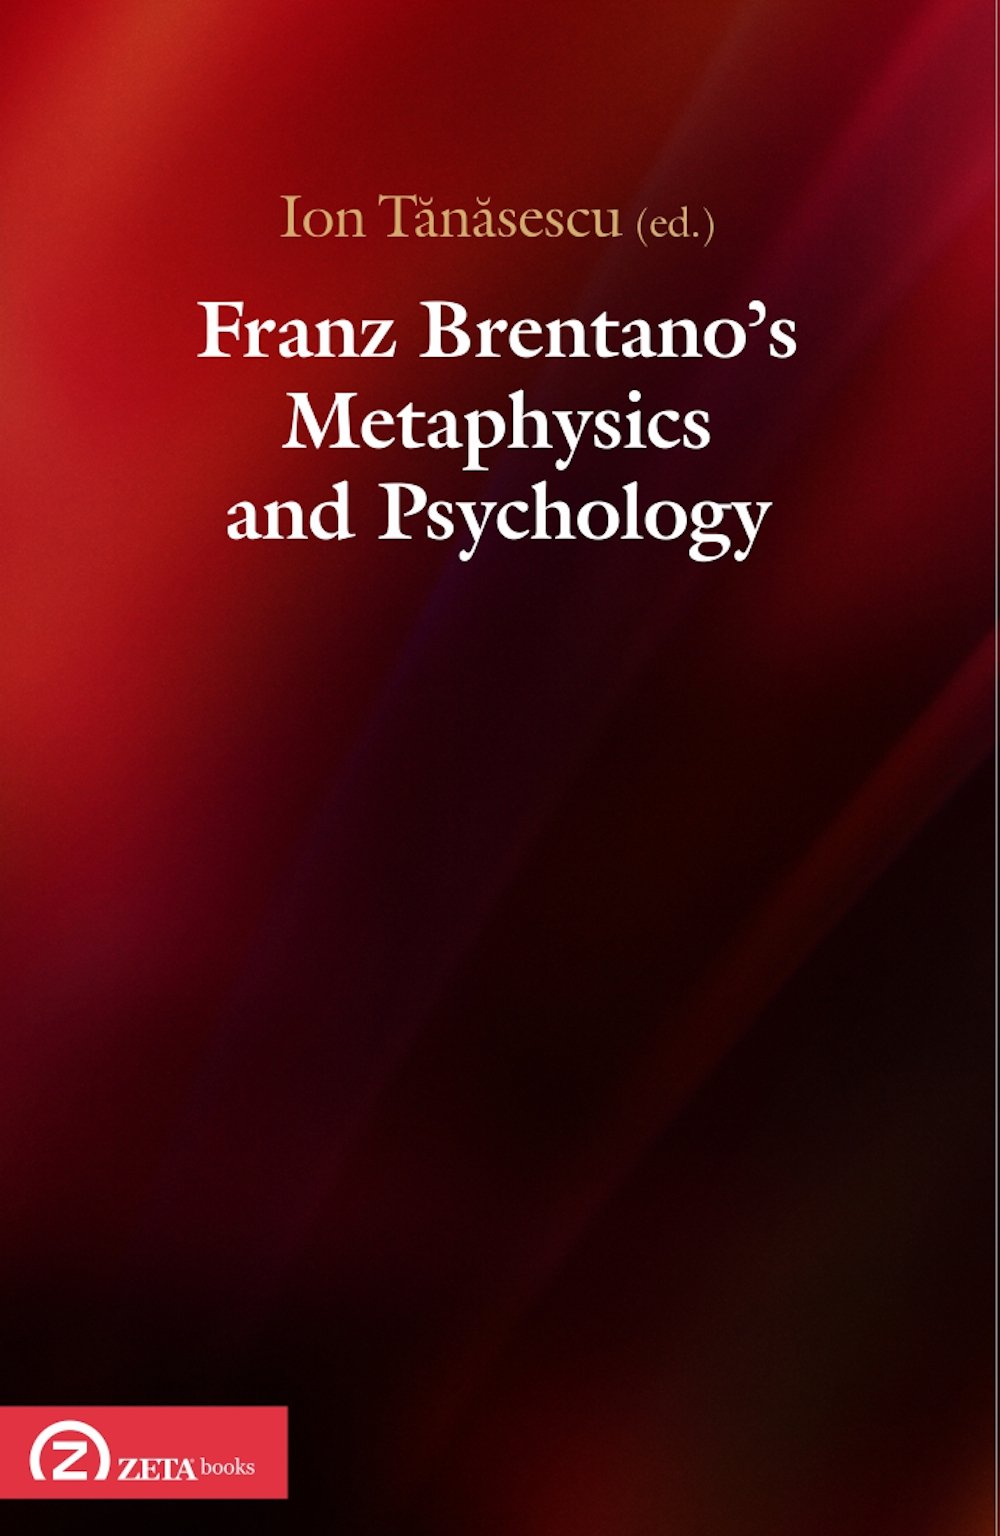 Franz Brentano\'s Metaphysics and Psychology | Ion Tanasescu, Carlo Ierna, Robin Rollinger, Dale Jacquette, Klaus Hedwig